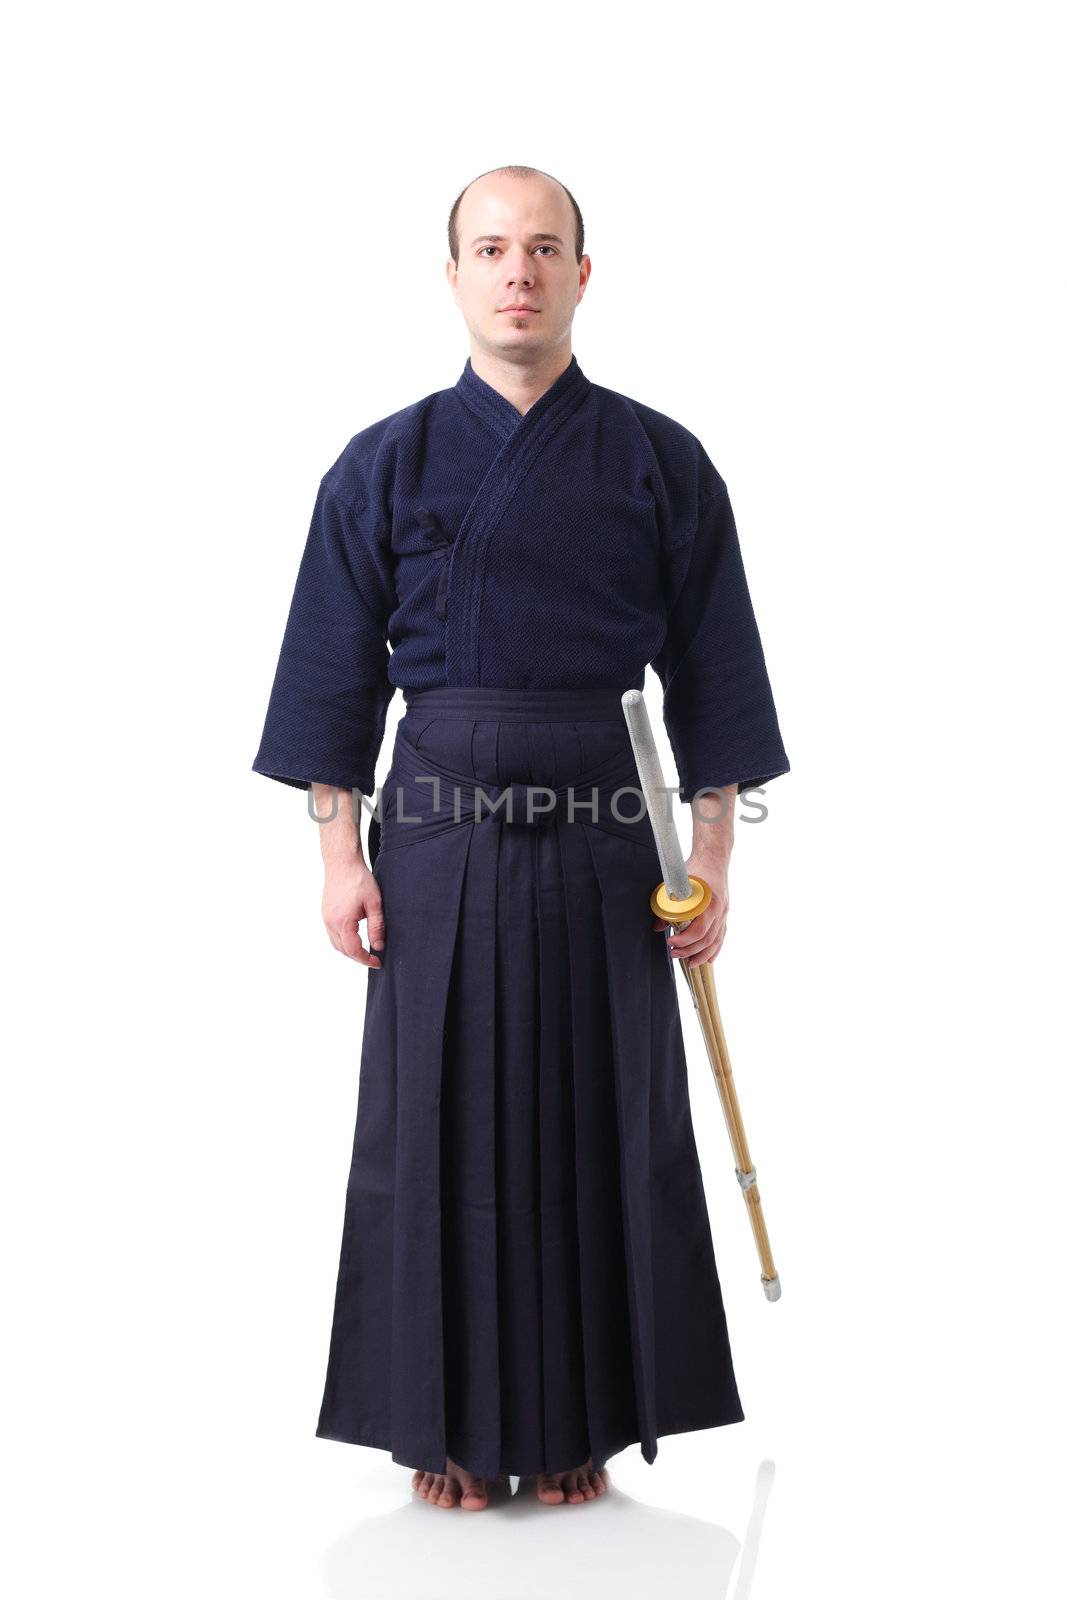 portrait of a kendo fighter with Shinai